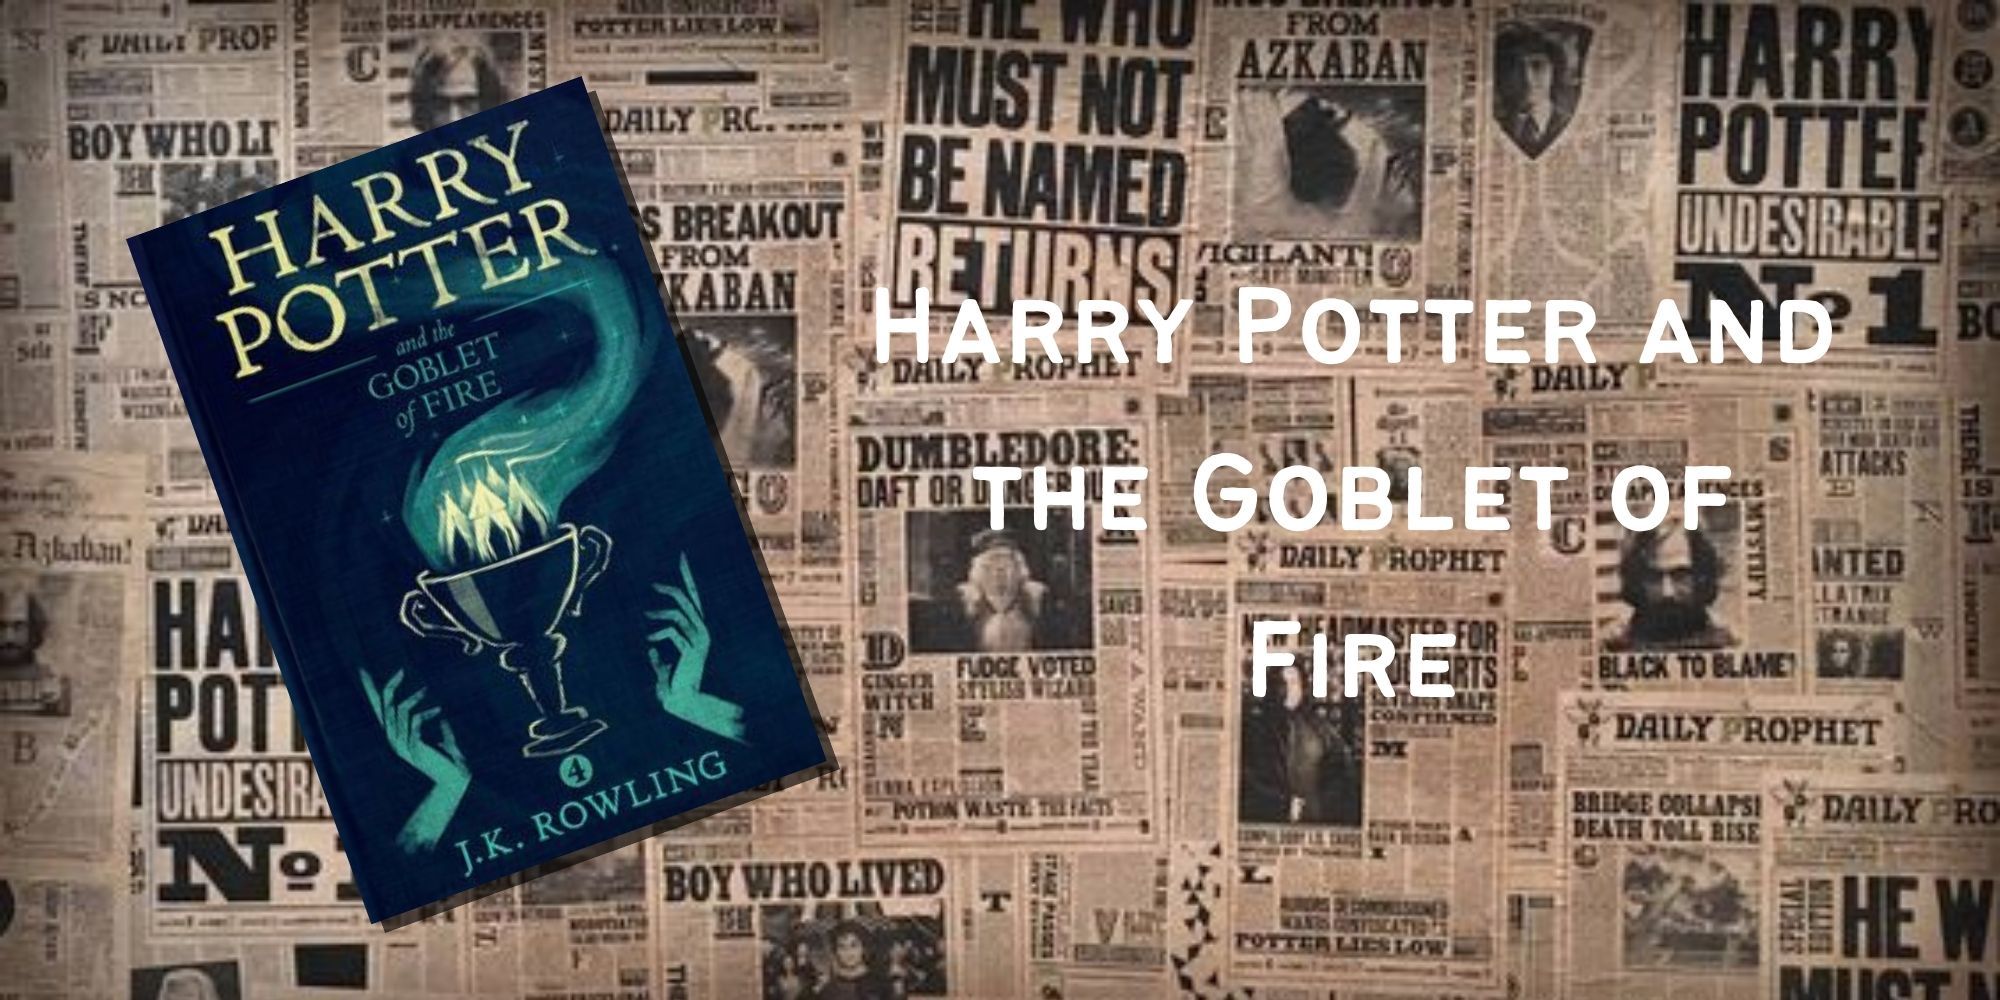 The cover of Harry Potter and the Goblet of Fire